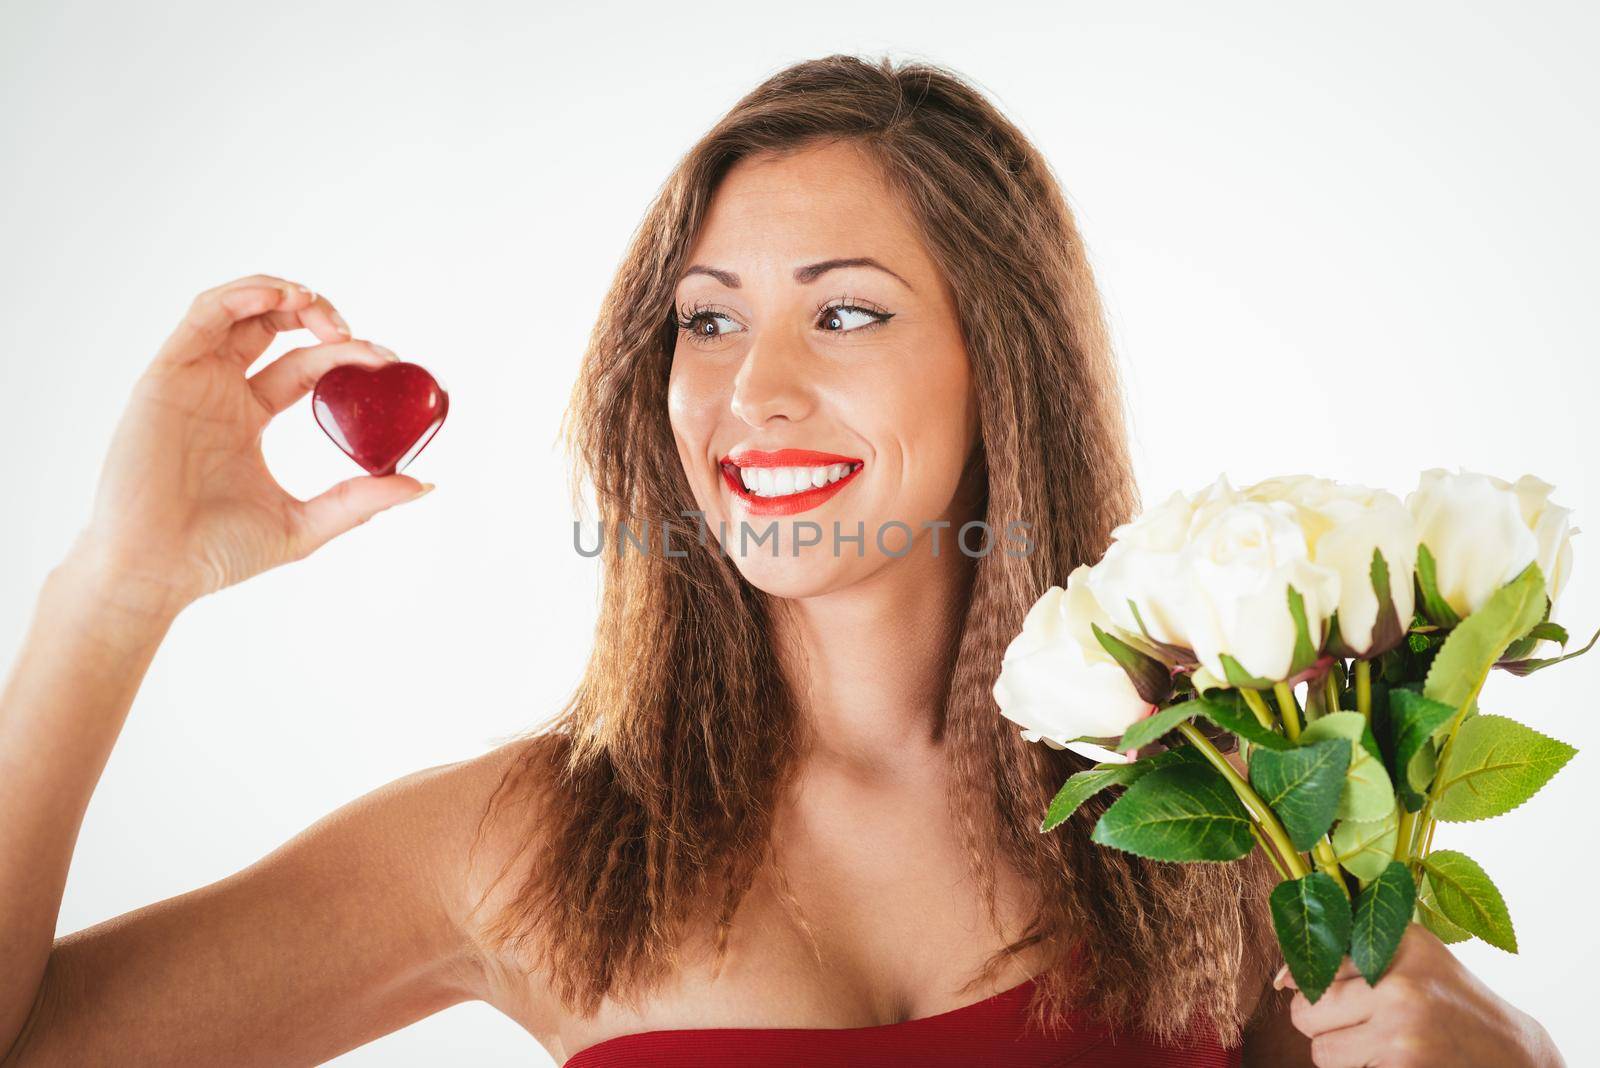 Portrait of a beautiful smiling girl holding a red heart and bouquet of white roses.